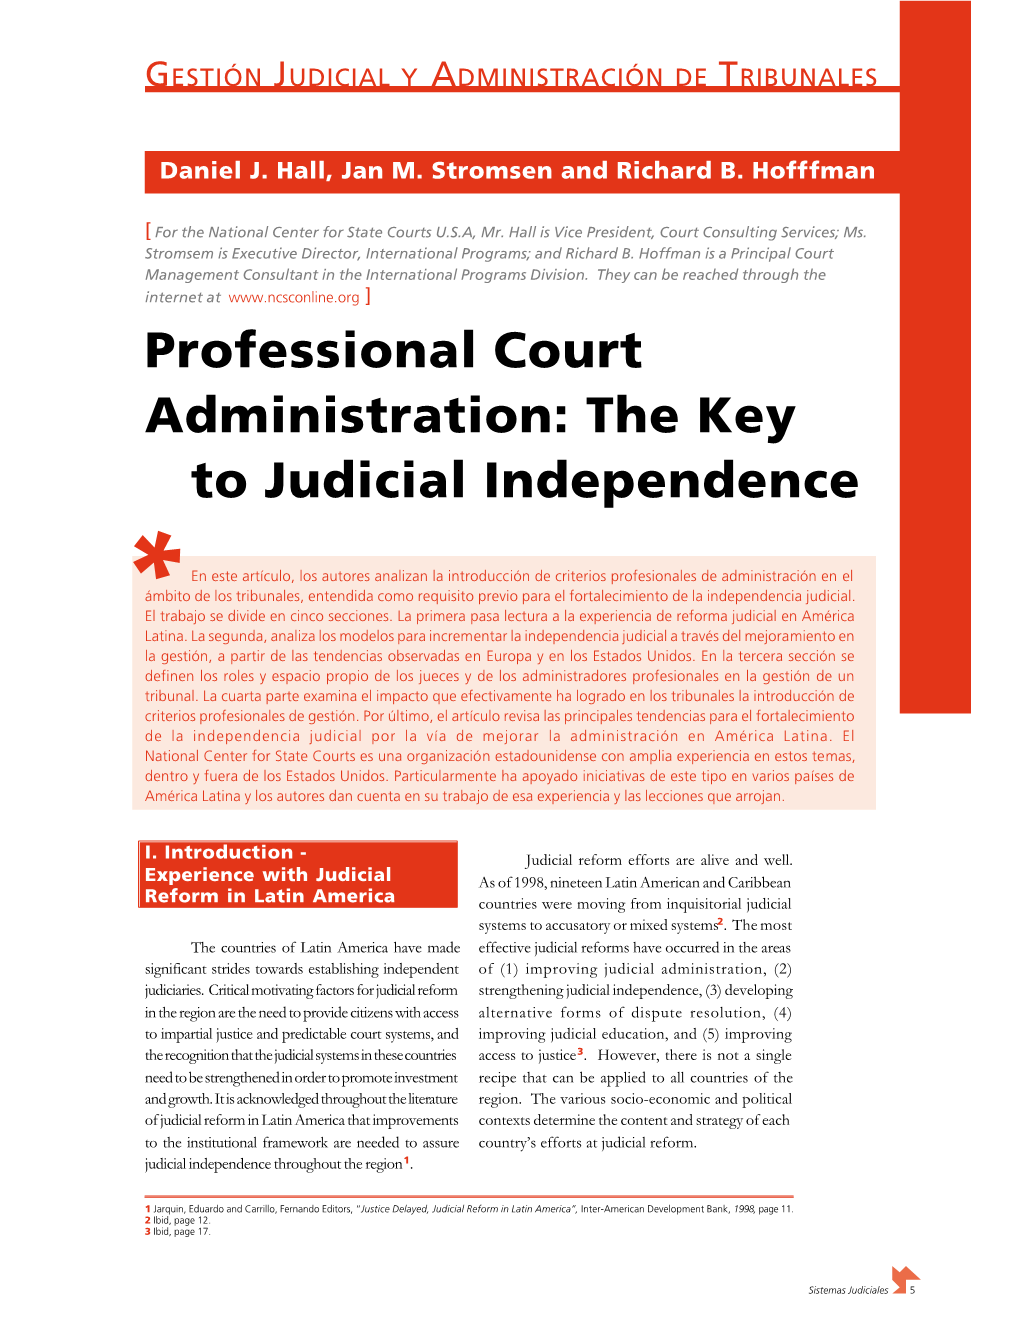 Professional Court Administration: the Key to Judicial Independence